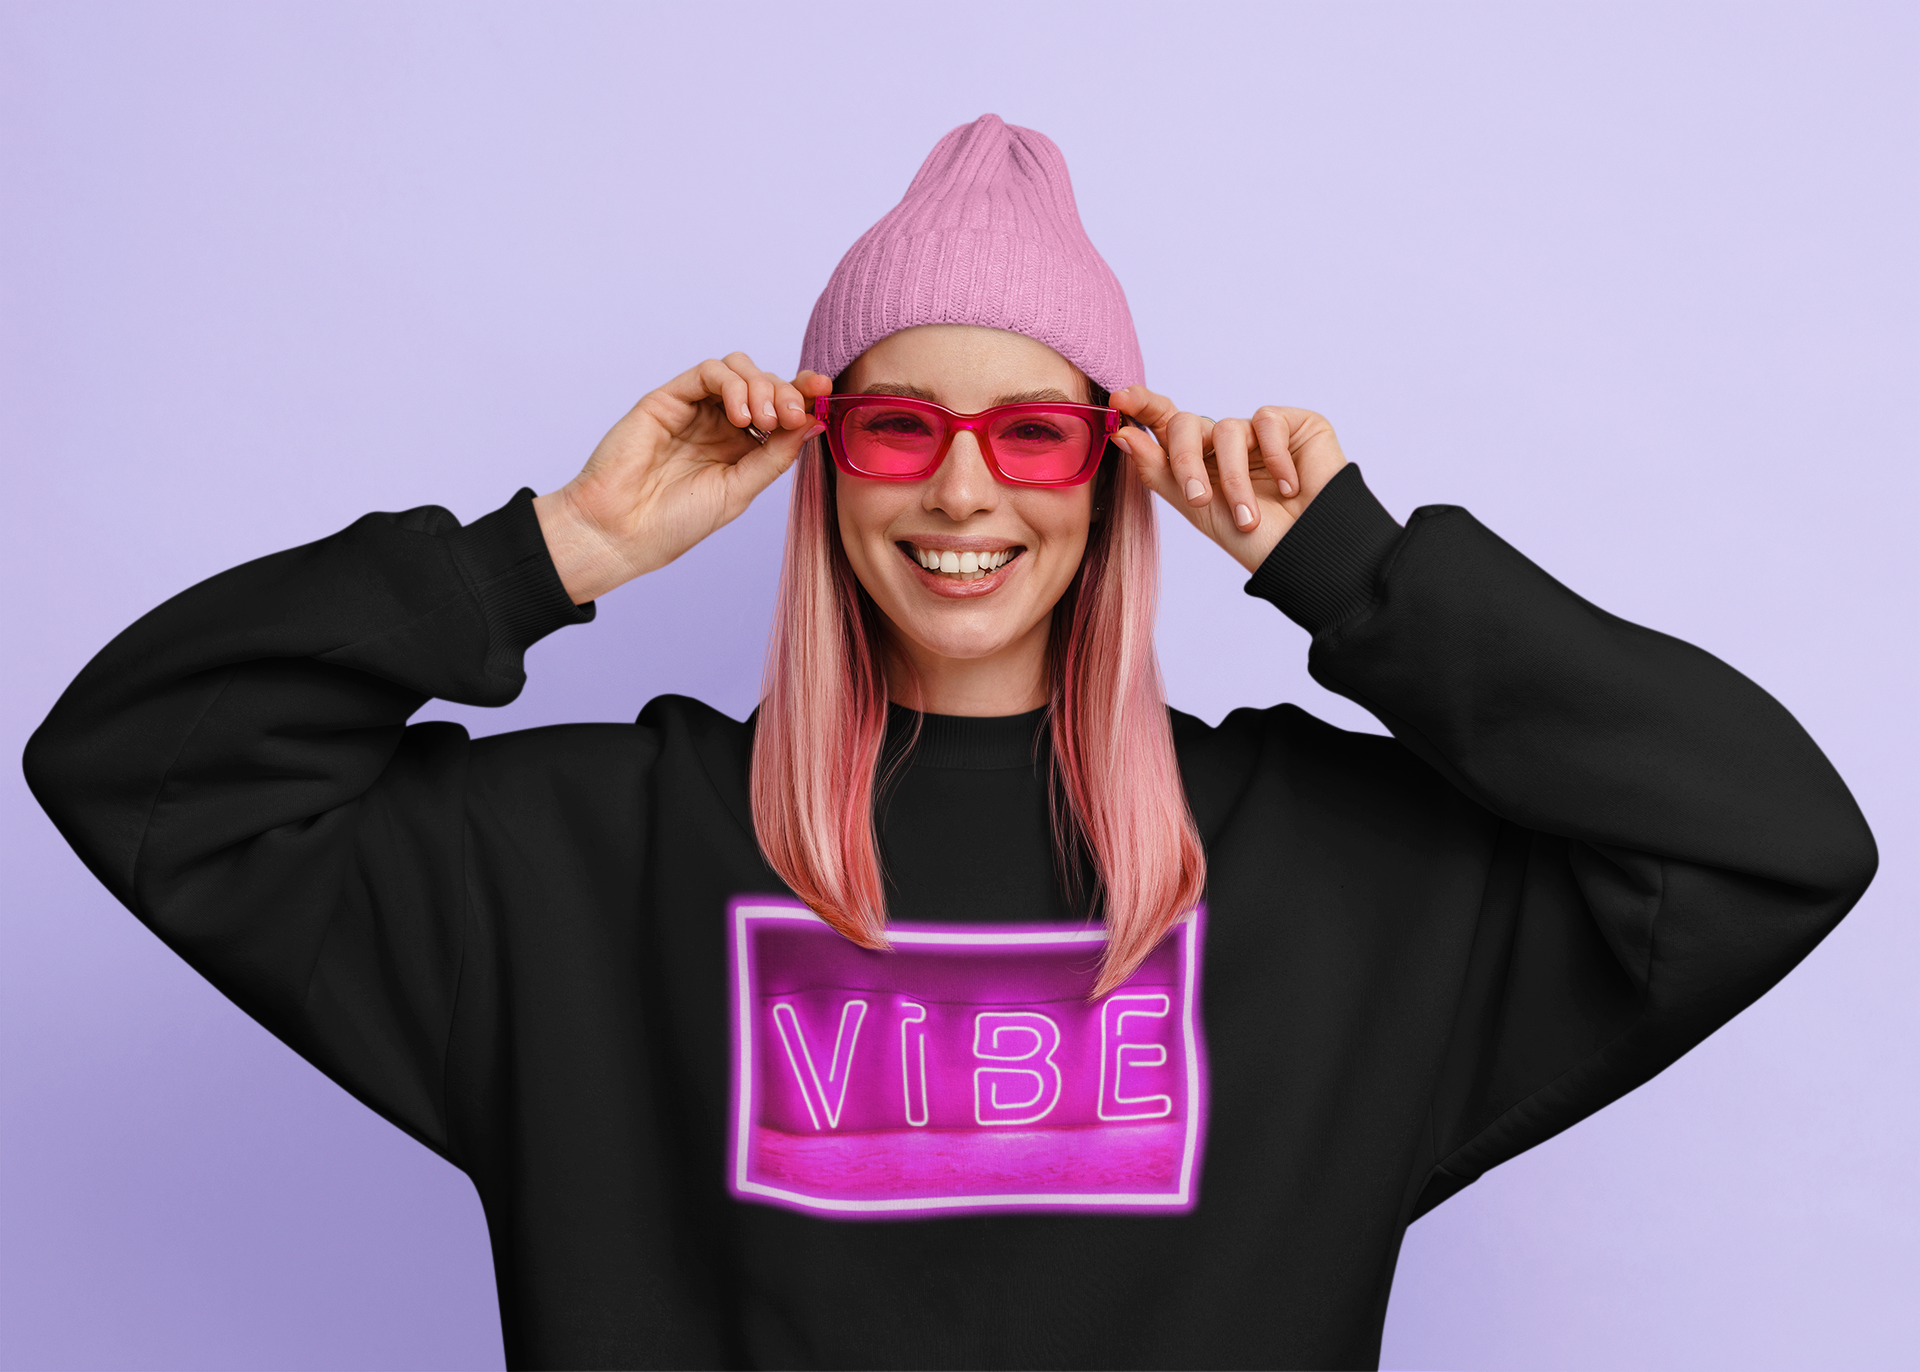 Smiling woman wearing pink beanie and sunglasses with a black and pink vibe sweatshirt.